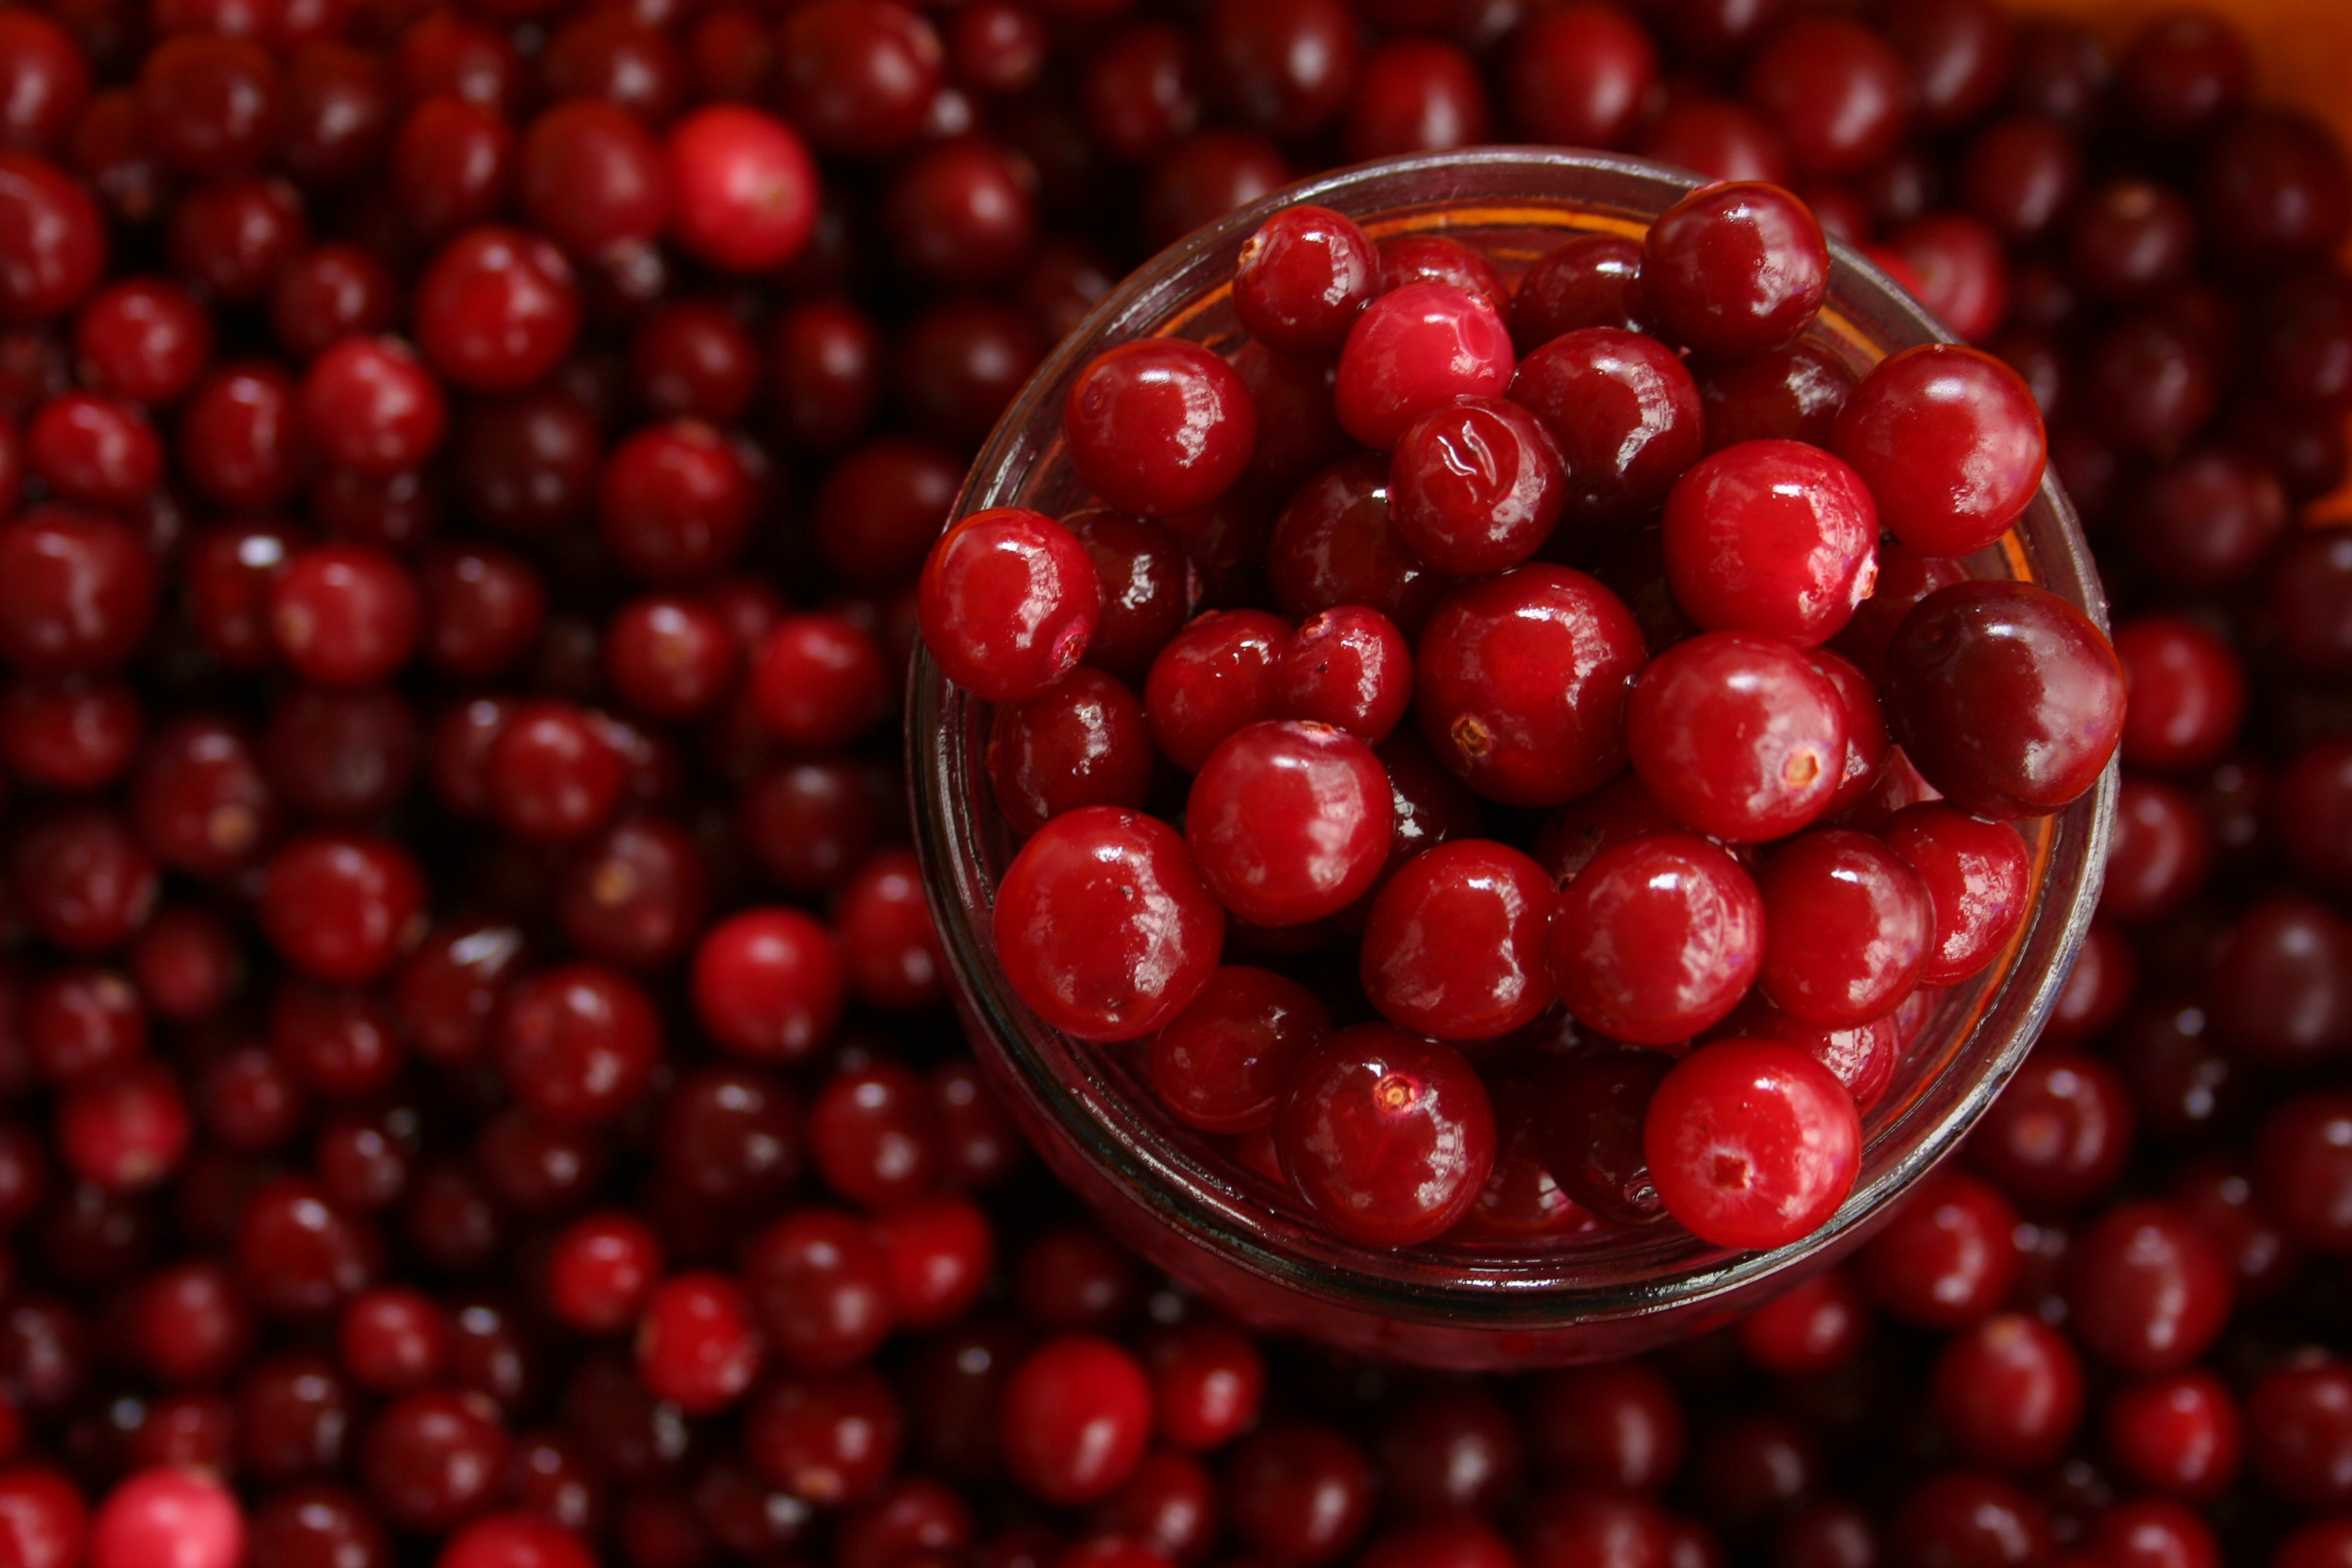 Photograph of cranberries in a pile and a glass